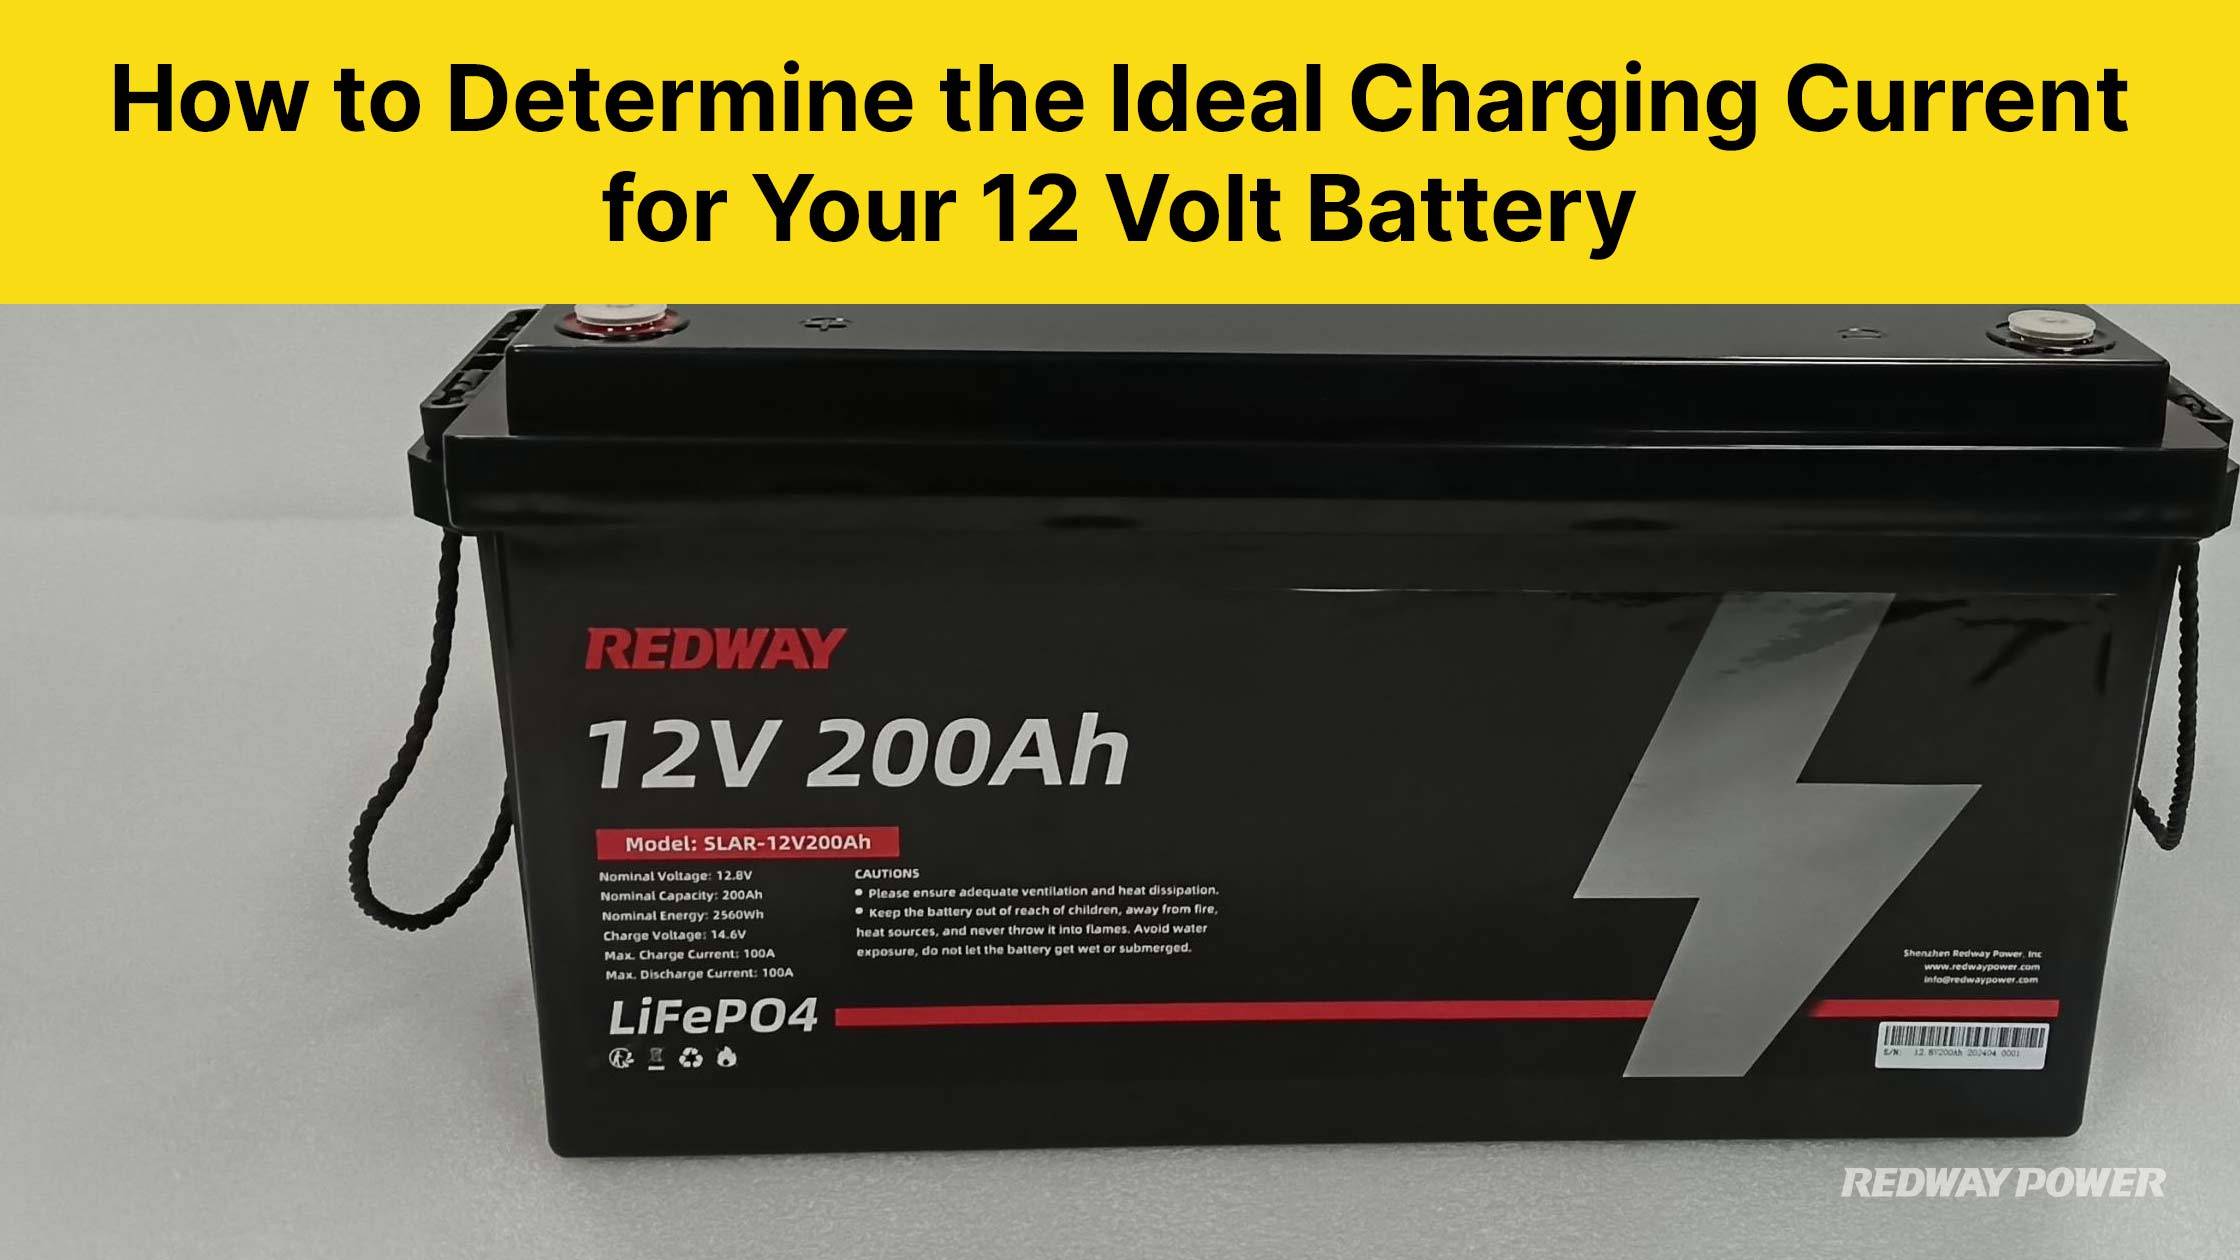 How to Determine the Ideal Charging Current for Your 12 Volt Battery. 12v 200ah lifepo4 battery rv battery marine battery redway